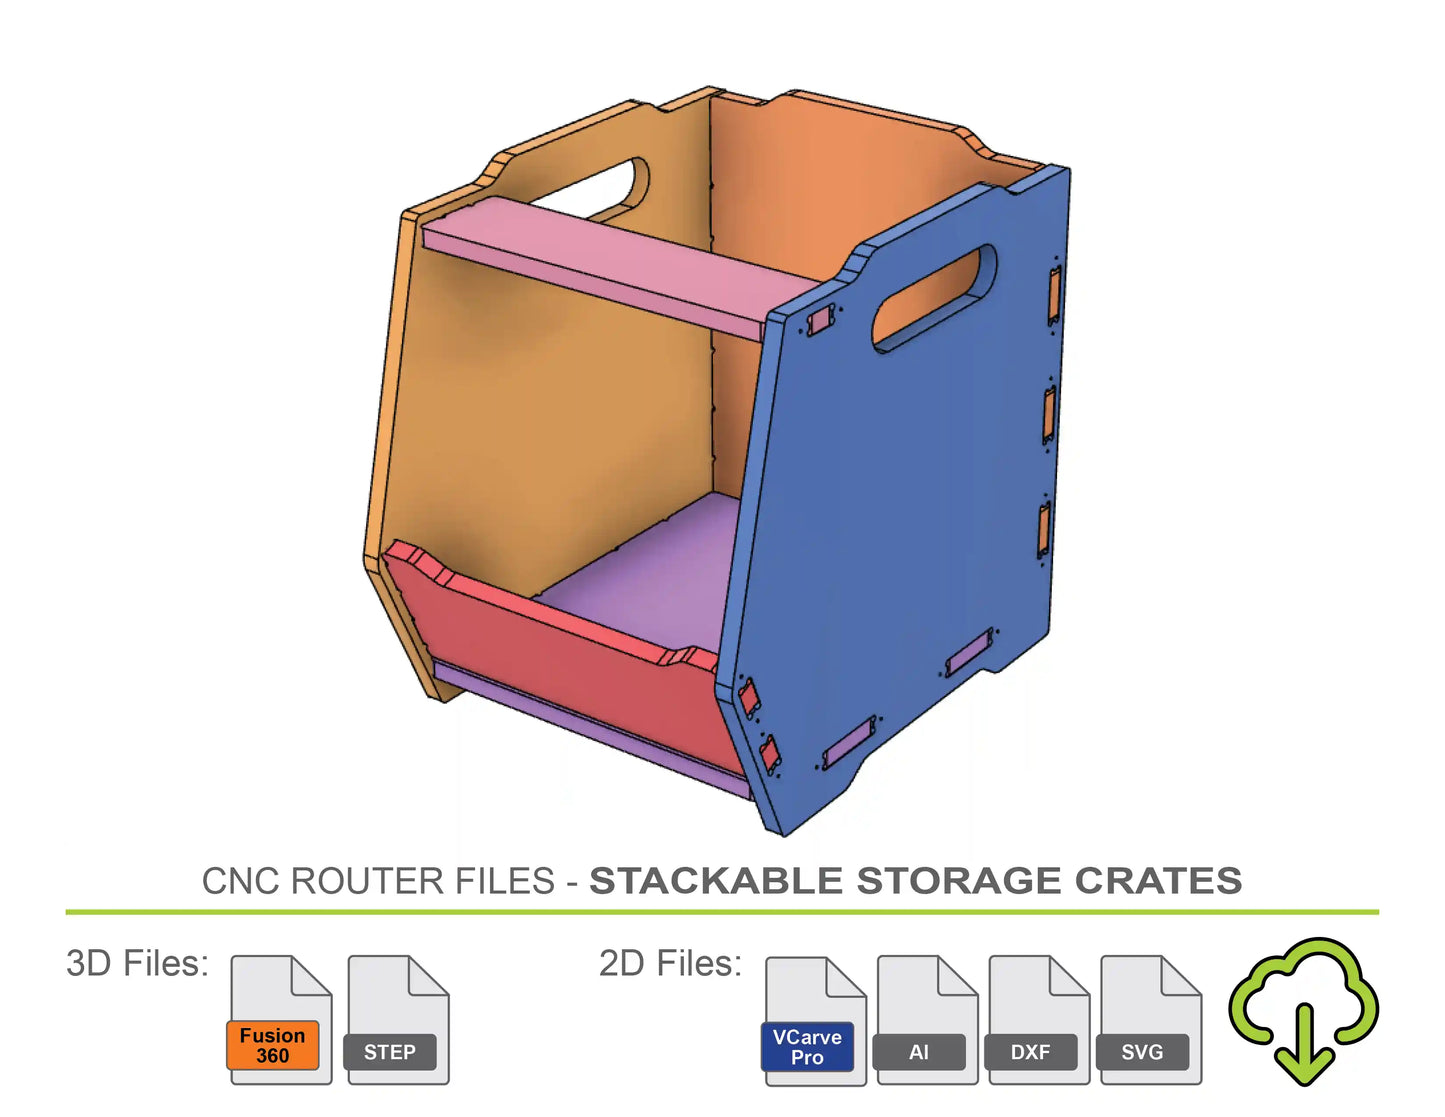 CNC Router Files Stackable Storage Crates